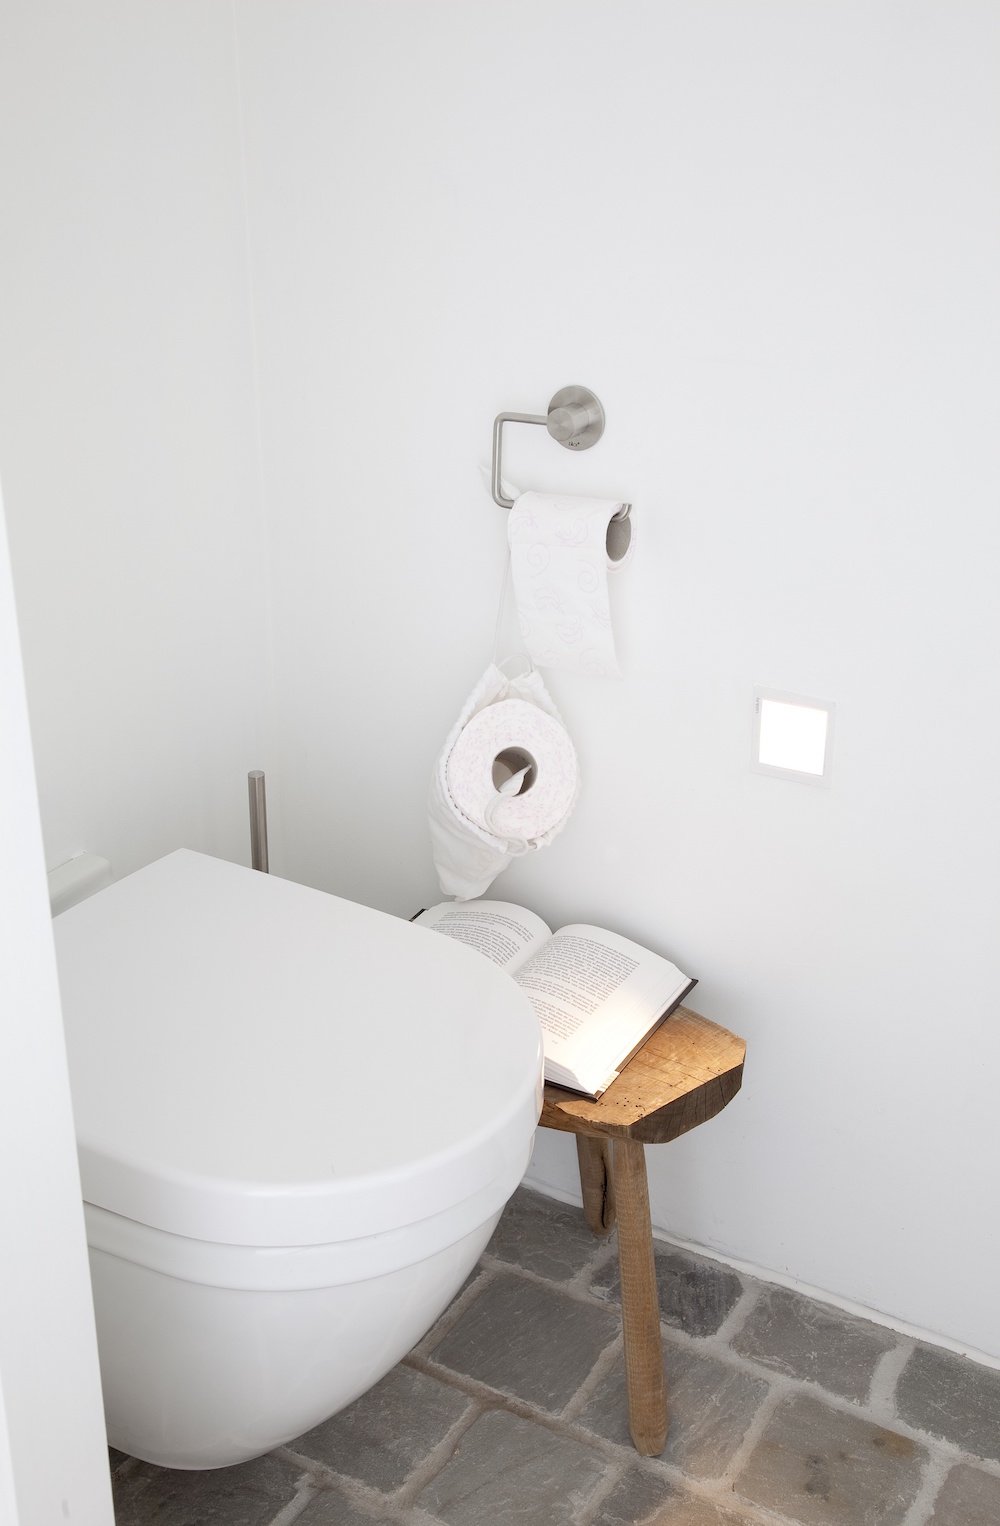 Image caption: The toilet from the Starck 3 series in the small guest bathroom of the dike house rounds off the off- white style – clean and reserved. | Image credit: Duravit